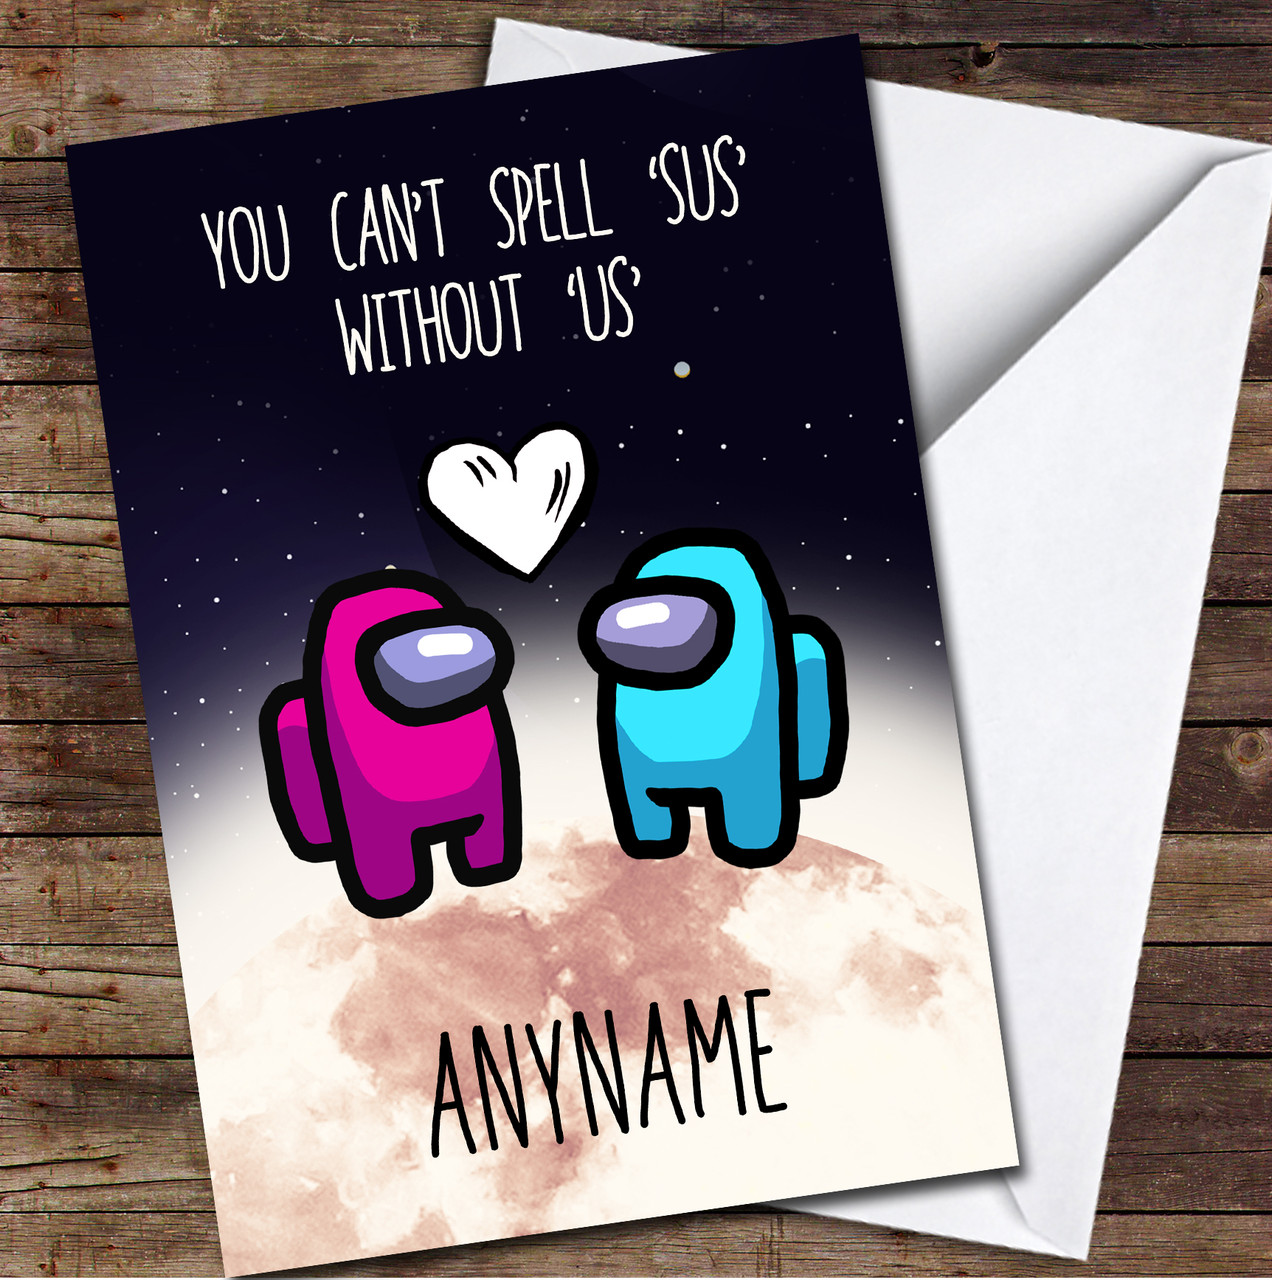 Among Us No Sus Without Us Personalized Valentine's Day Card - Red